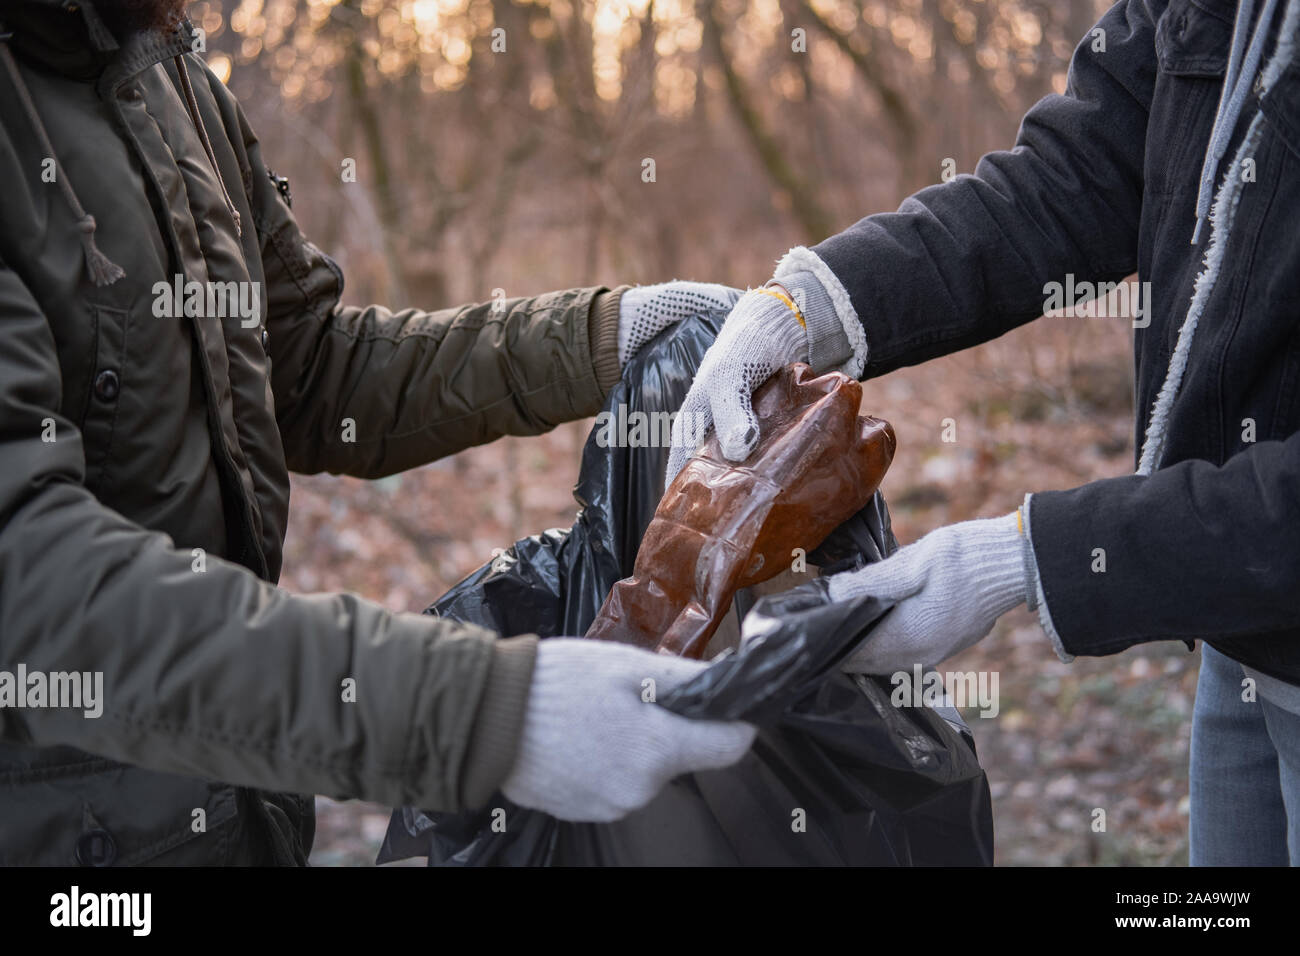 Environmental awareness concept: people clean up forest from plastic waste. Gathering old bottles and other trash from the nature Stock Photo